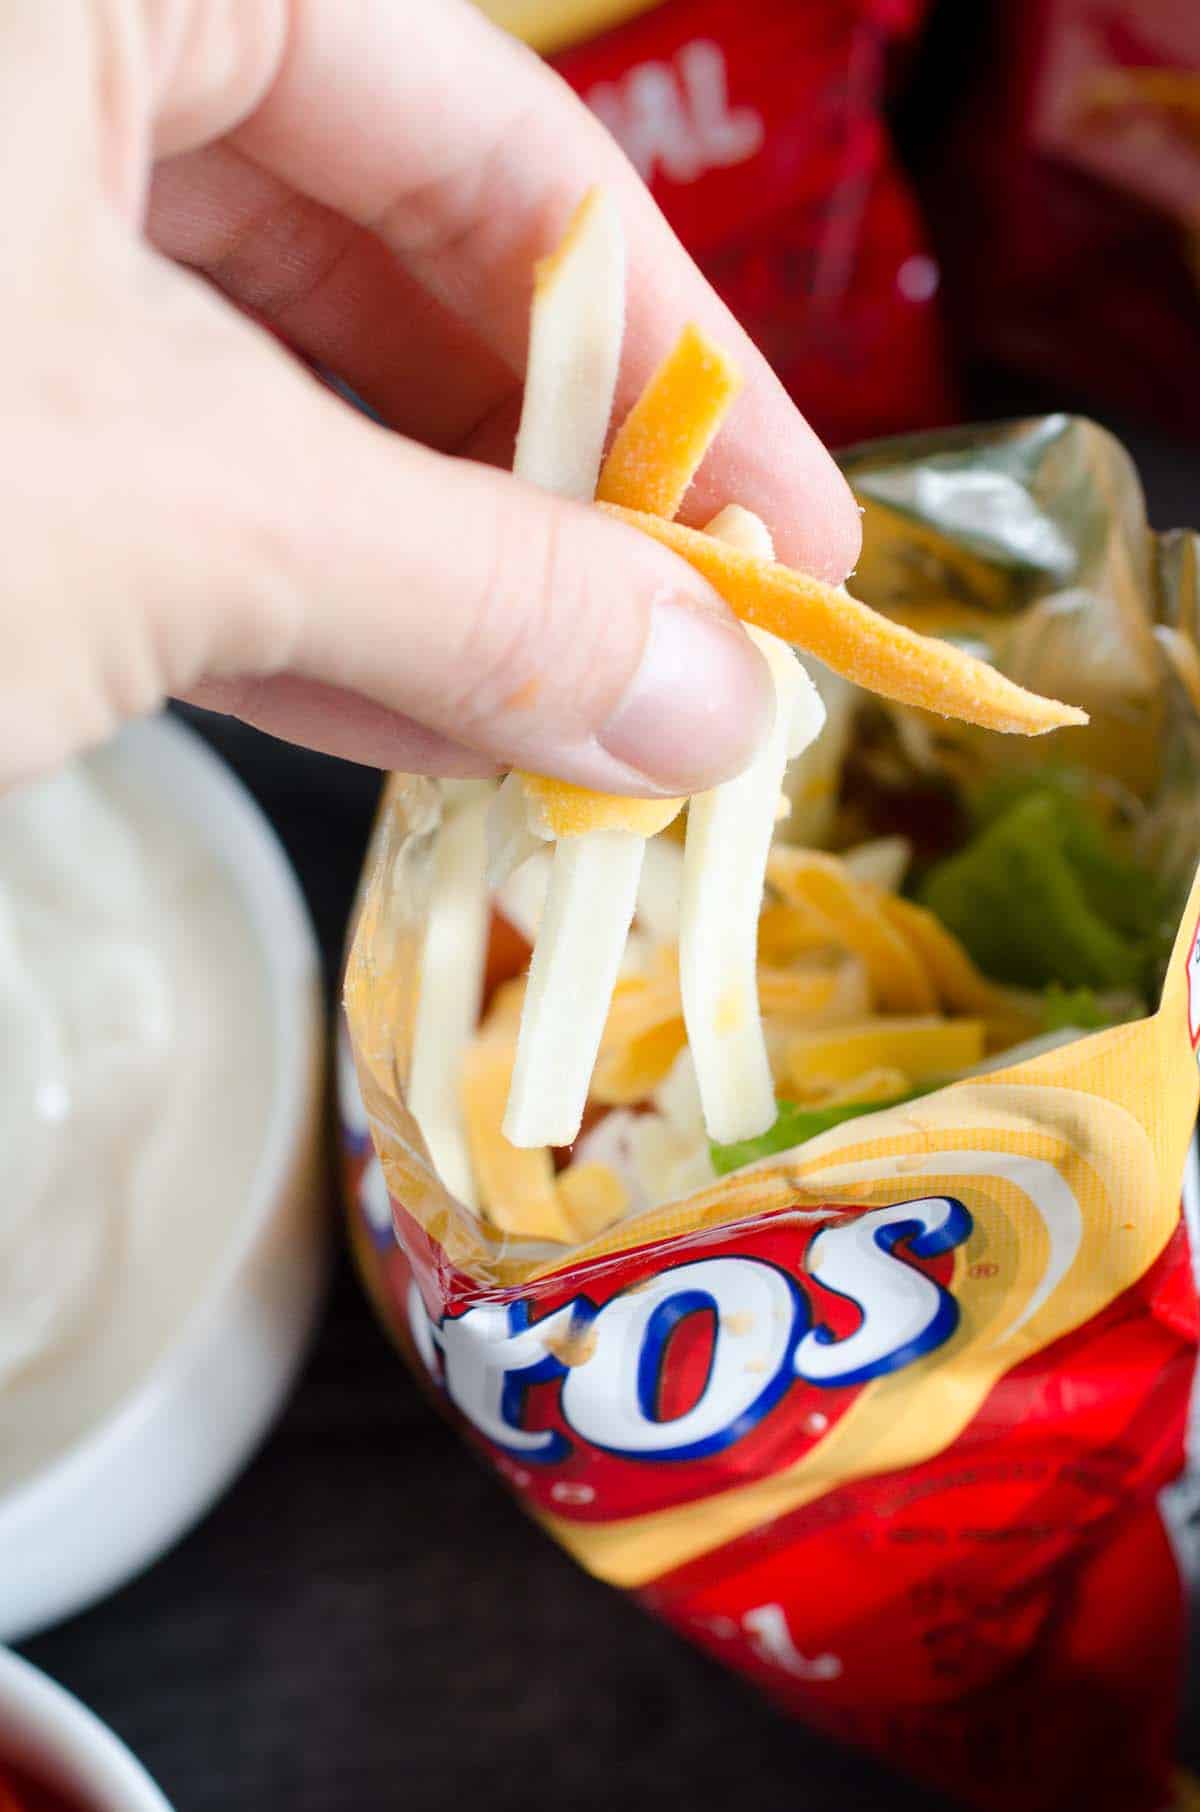 putting shredded cheese into bag of fritos